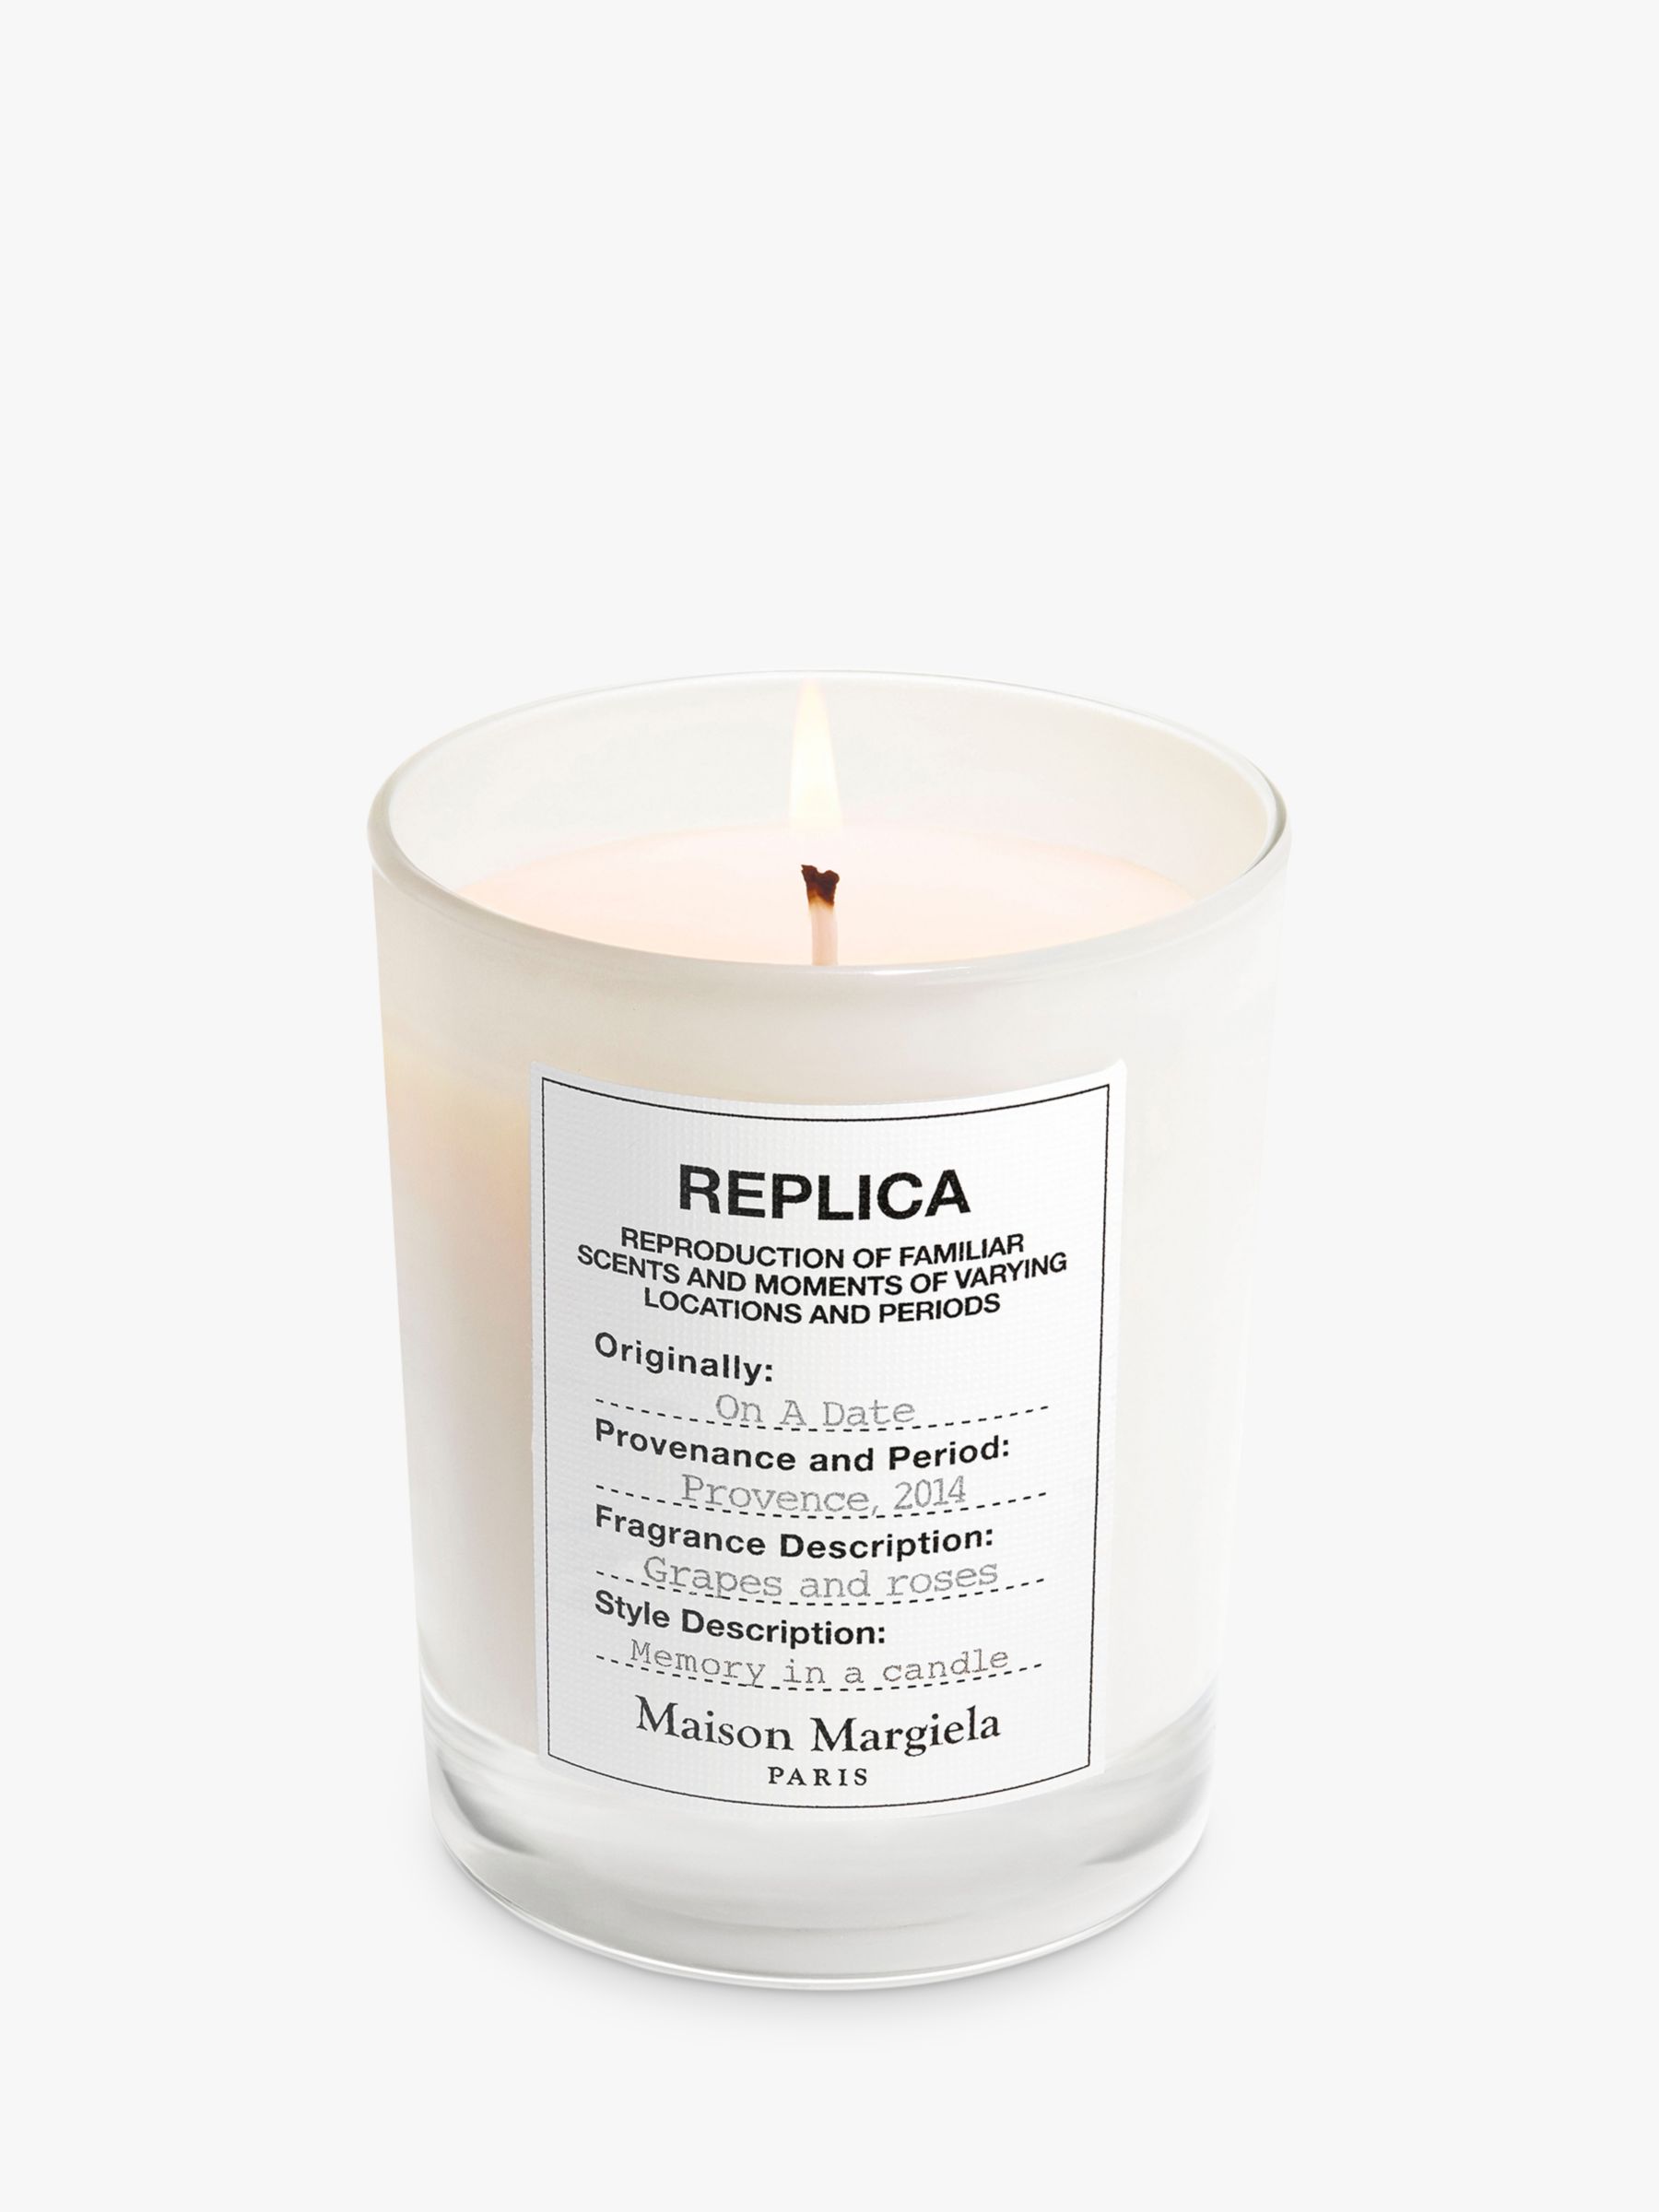 Maison Margiela Replica On a Date Scented Candle, 165g